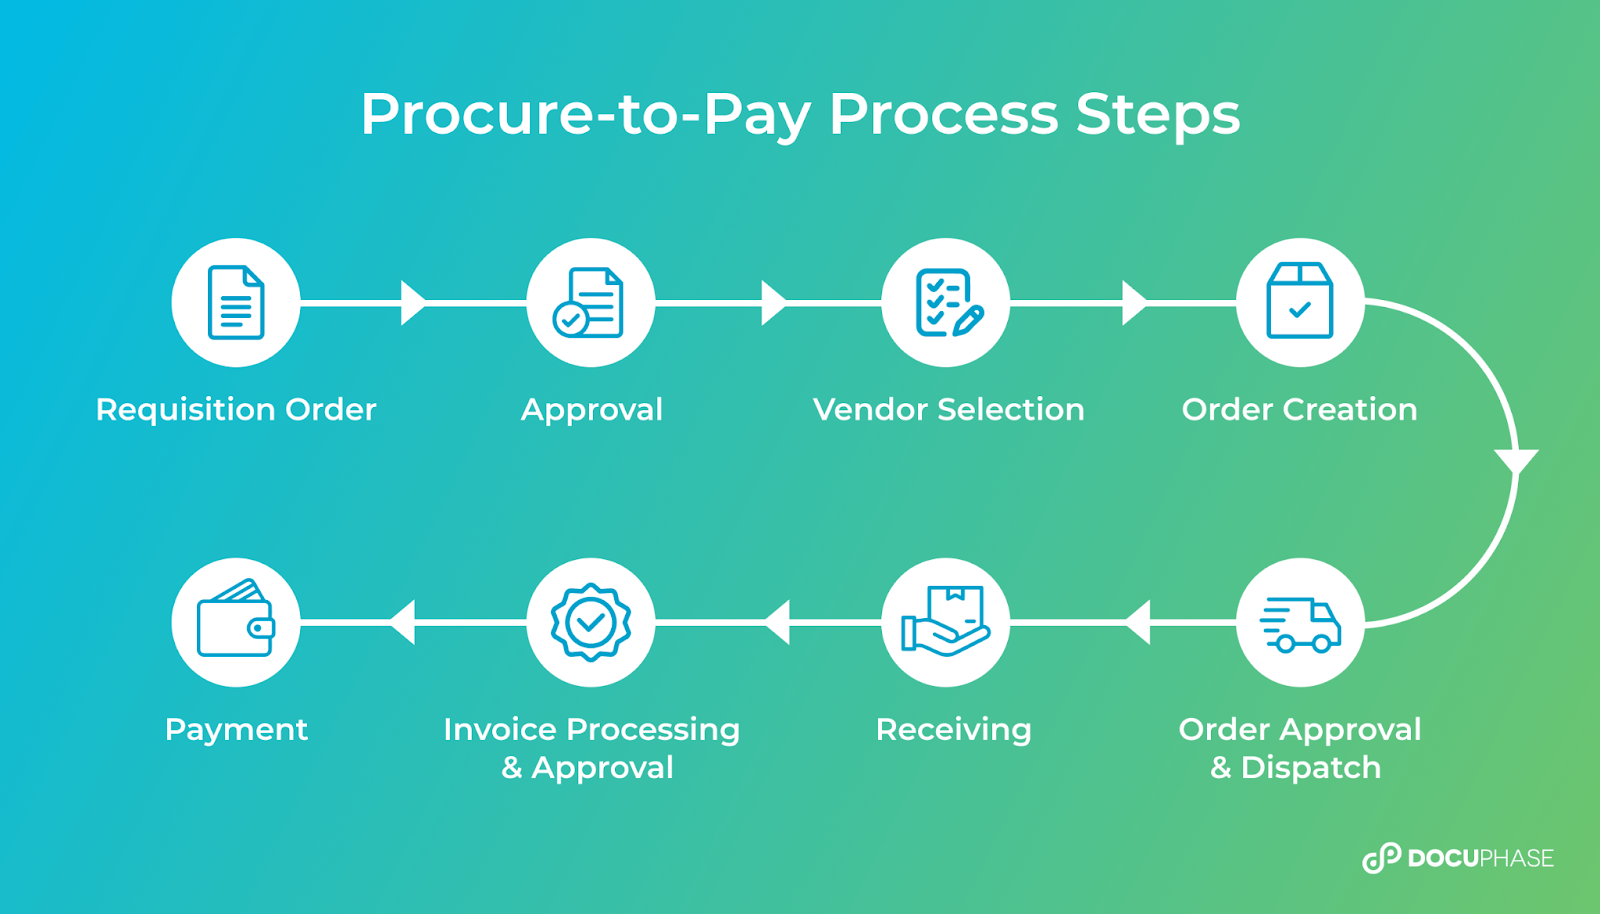 How To Implement A Procure To Pay P2P System Glass Procurement 